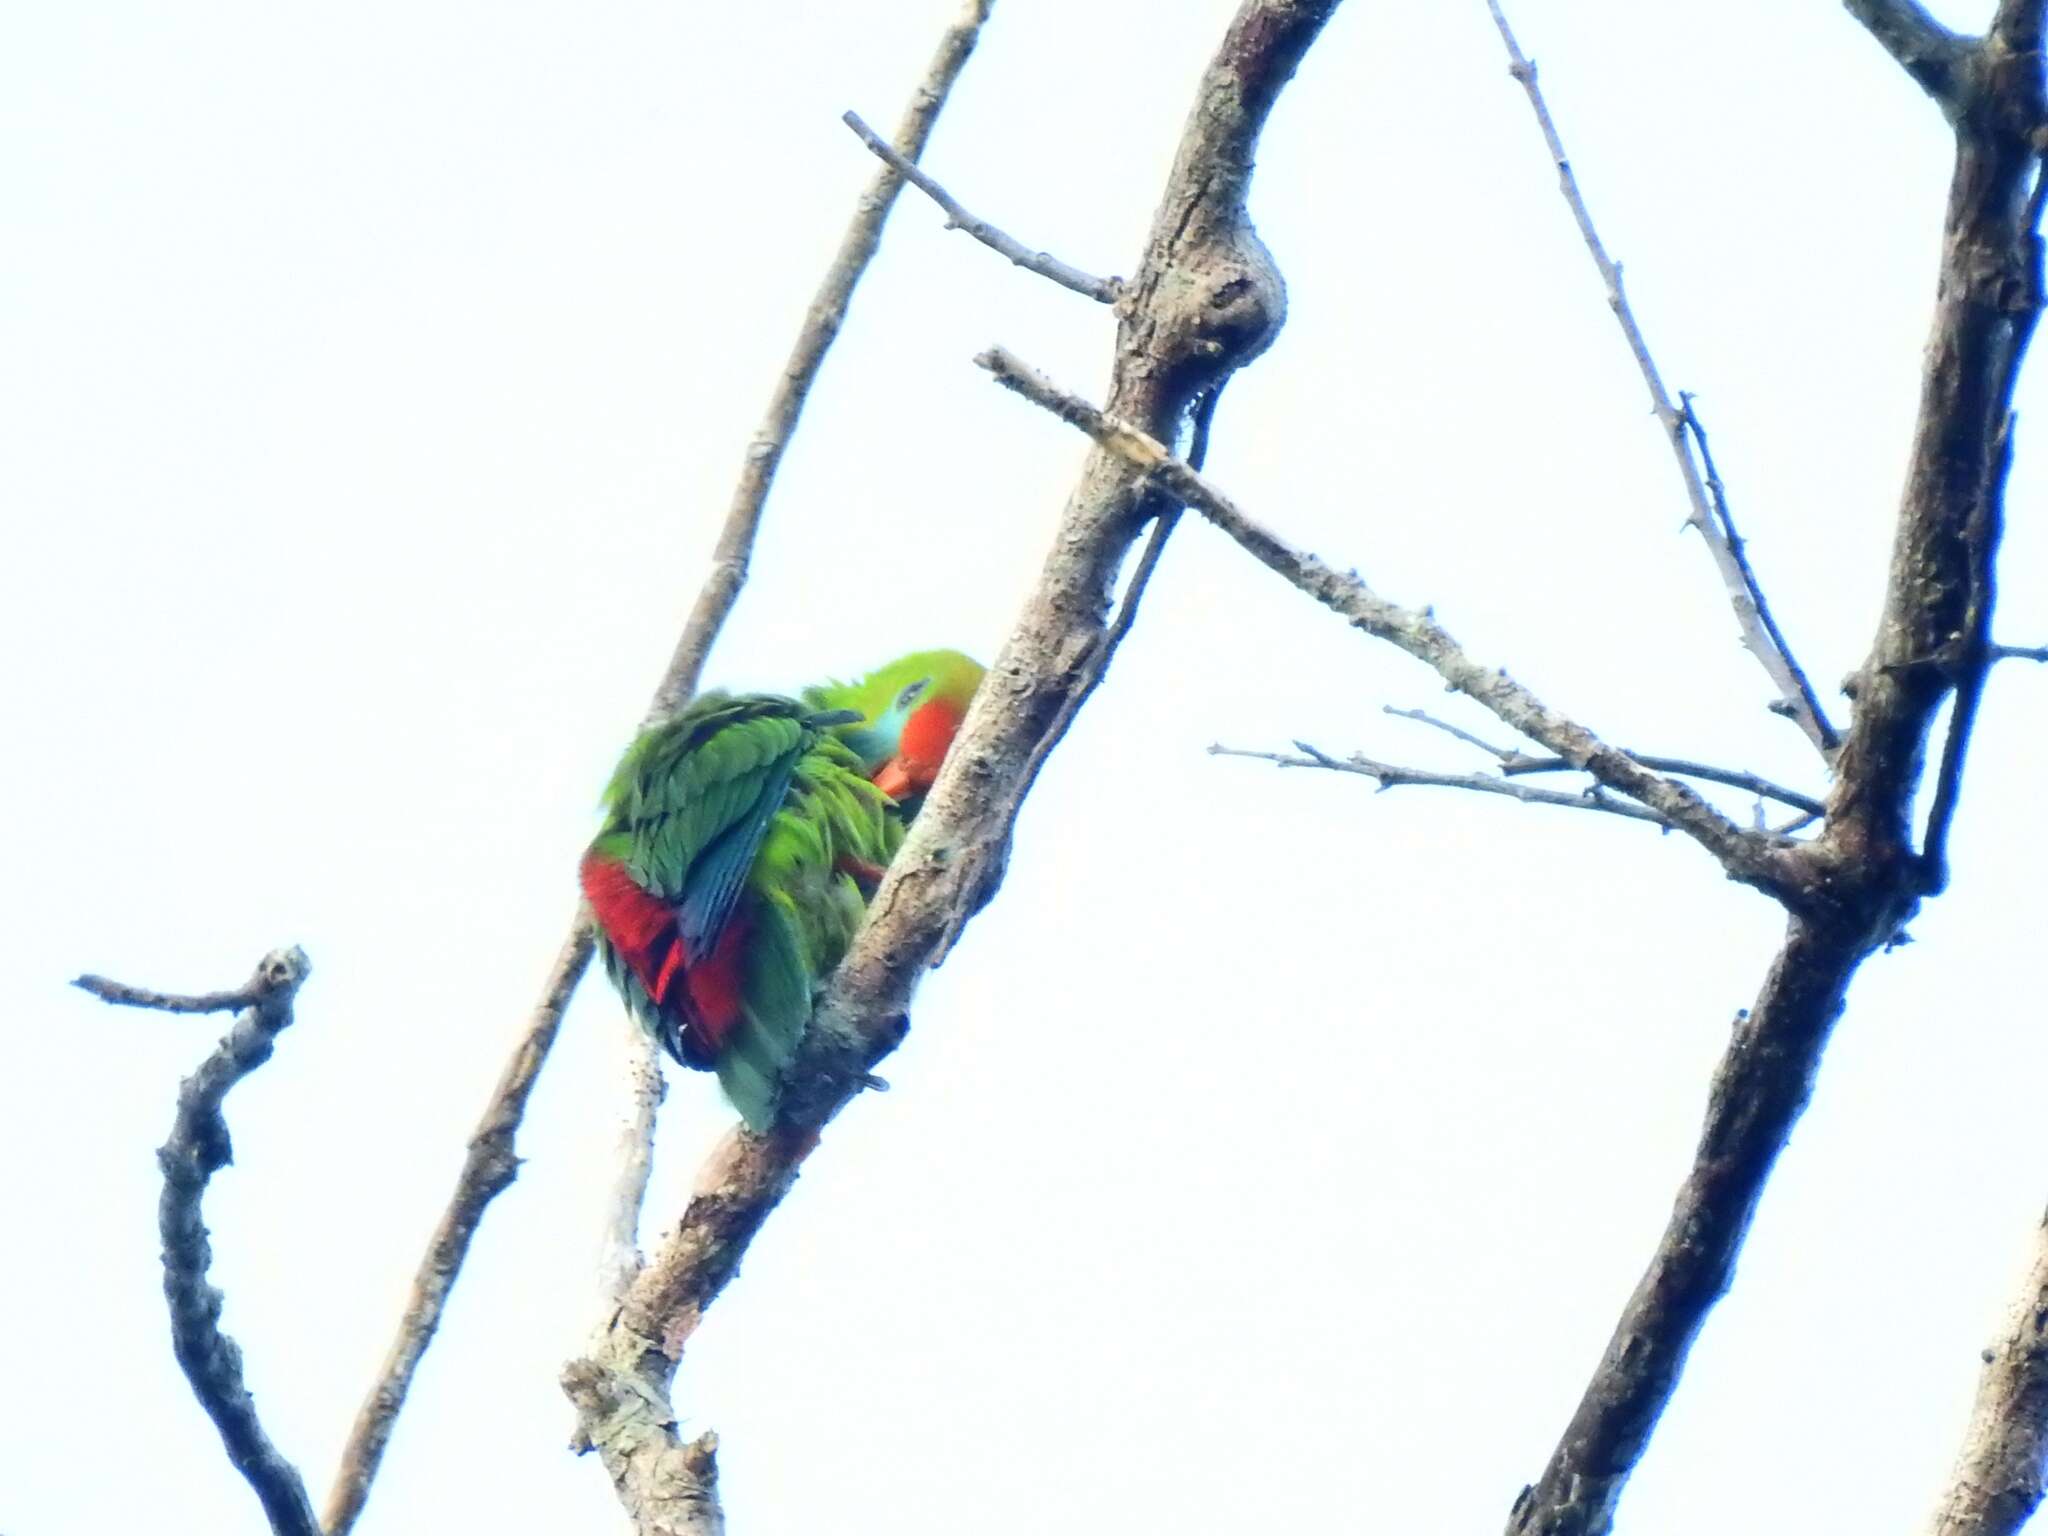 Image of Philippine Hanging Parrot